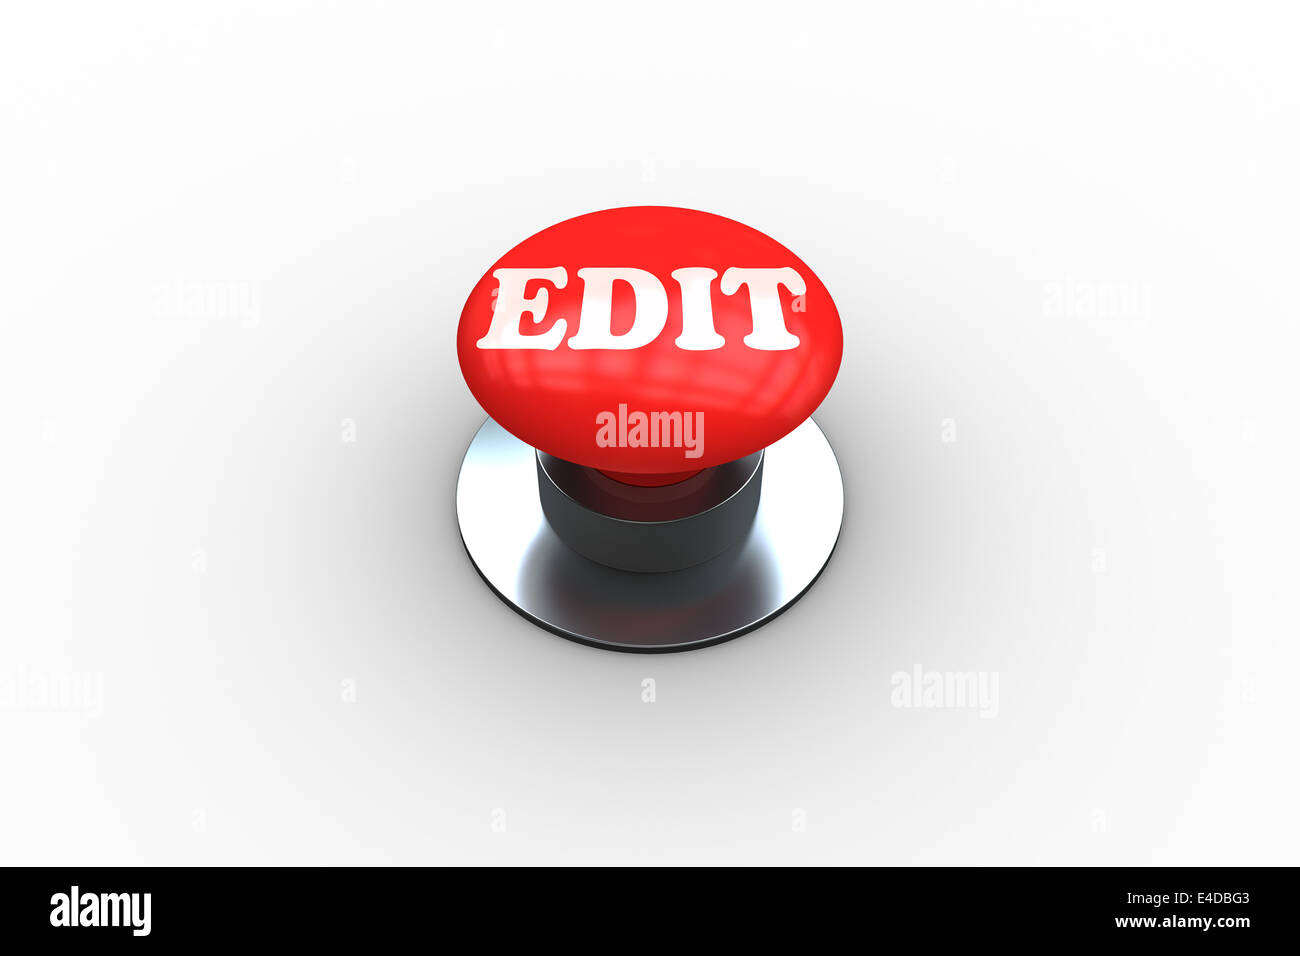 Edit on digitally generated red push button Stock Photo